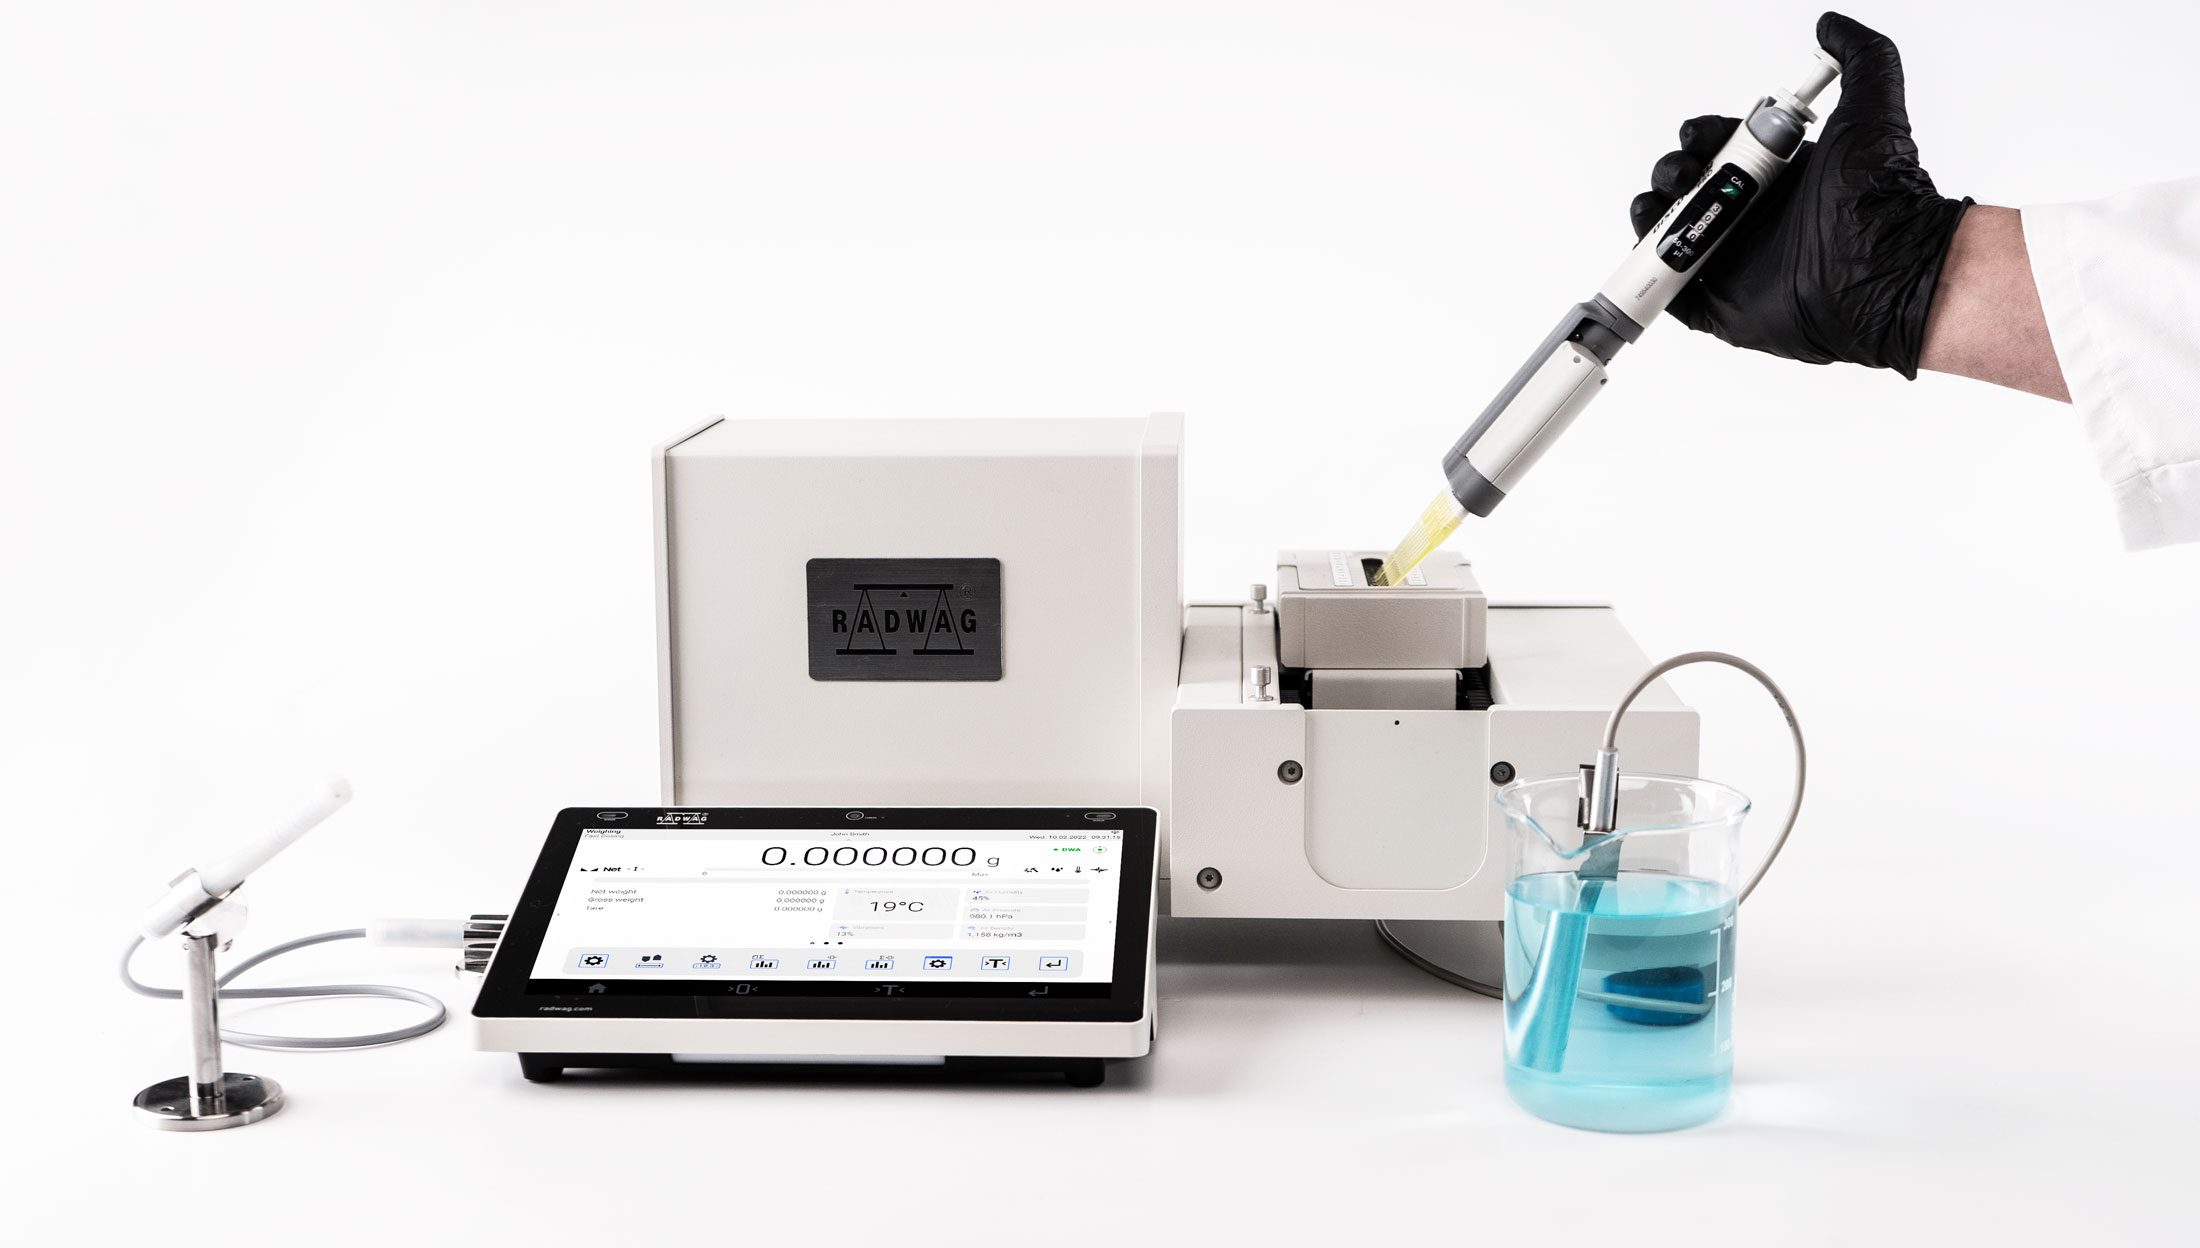 AP-12.5Y  Automatic Device for Multichannel Pipette Calibration › Pipetting